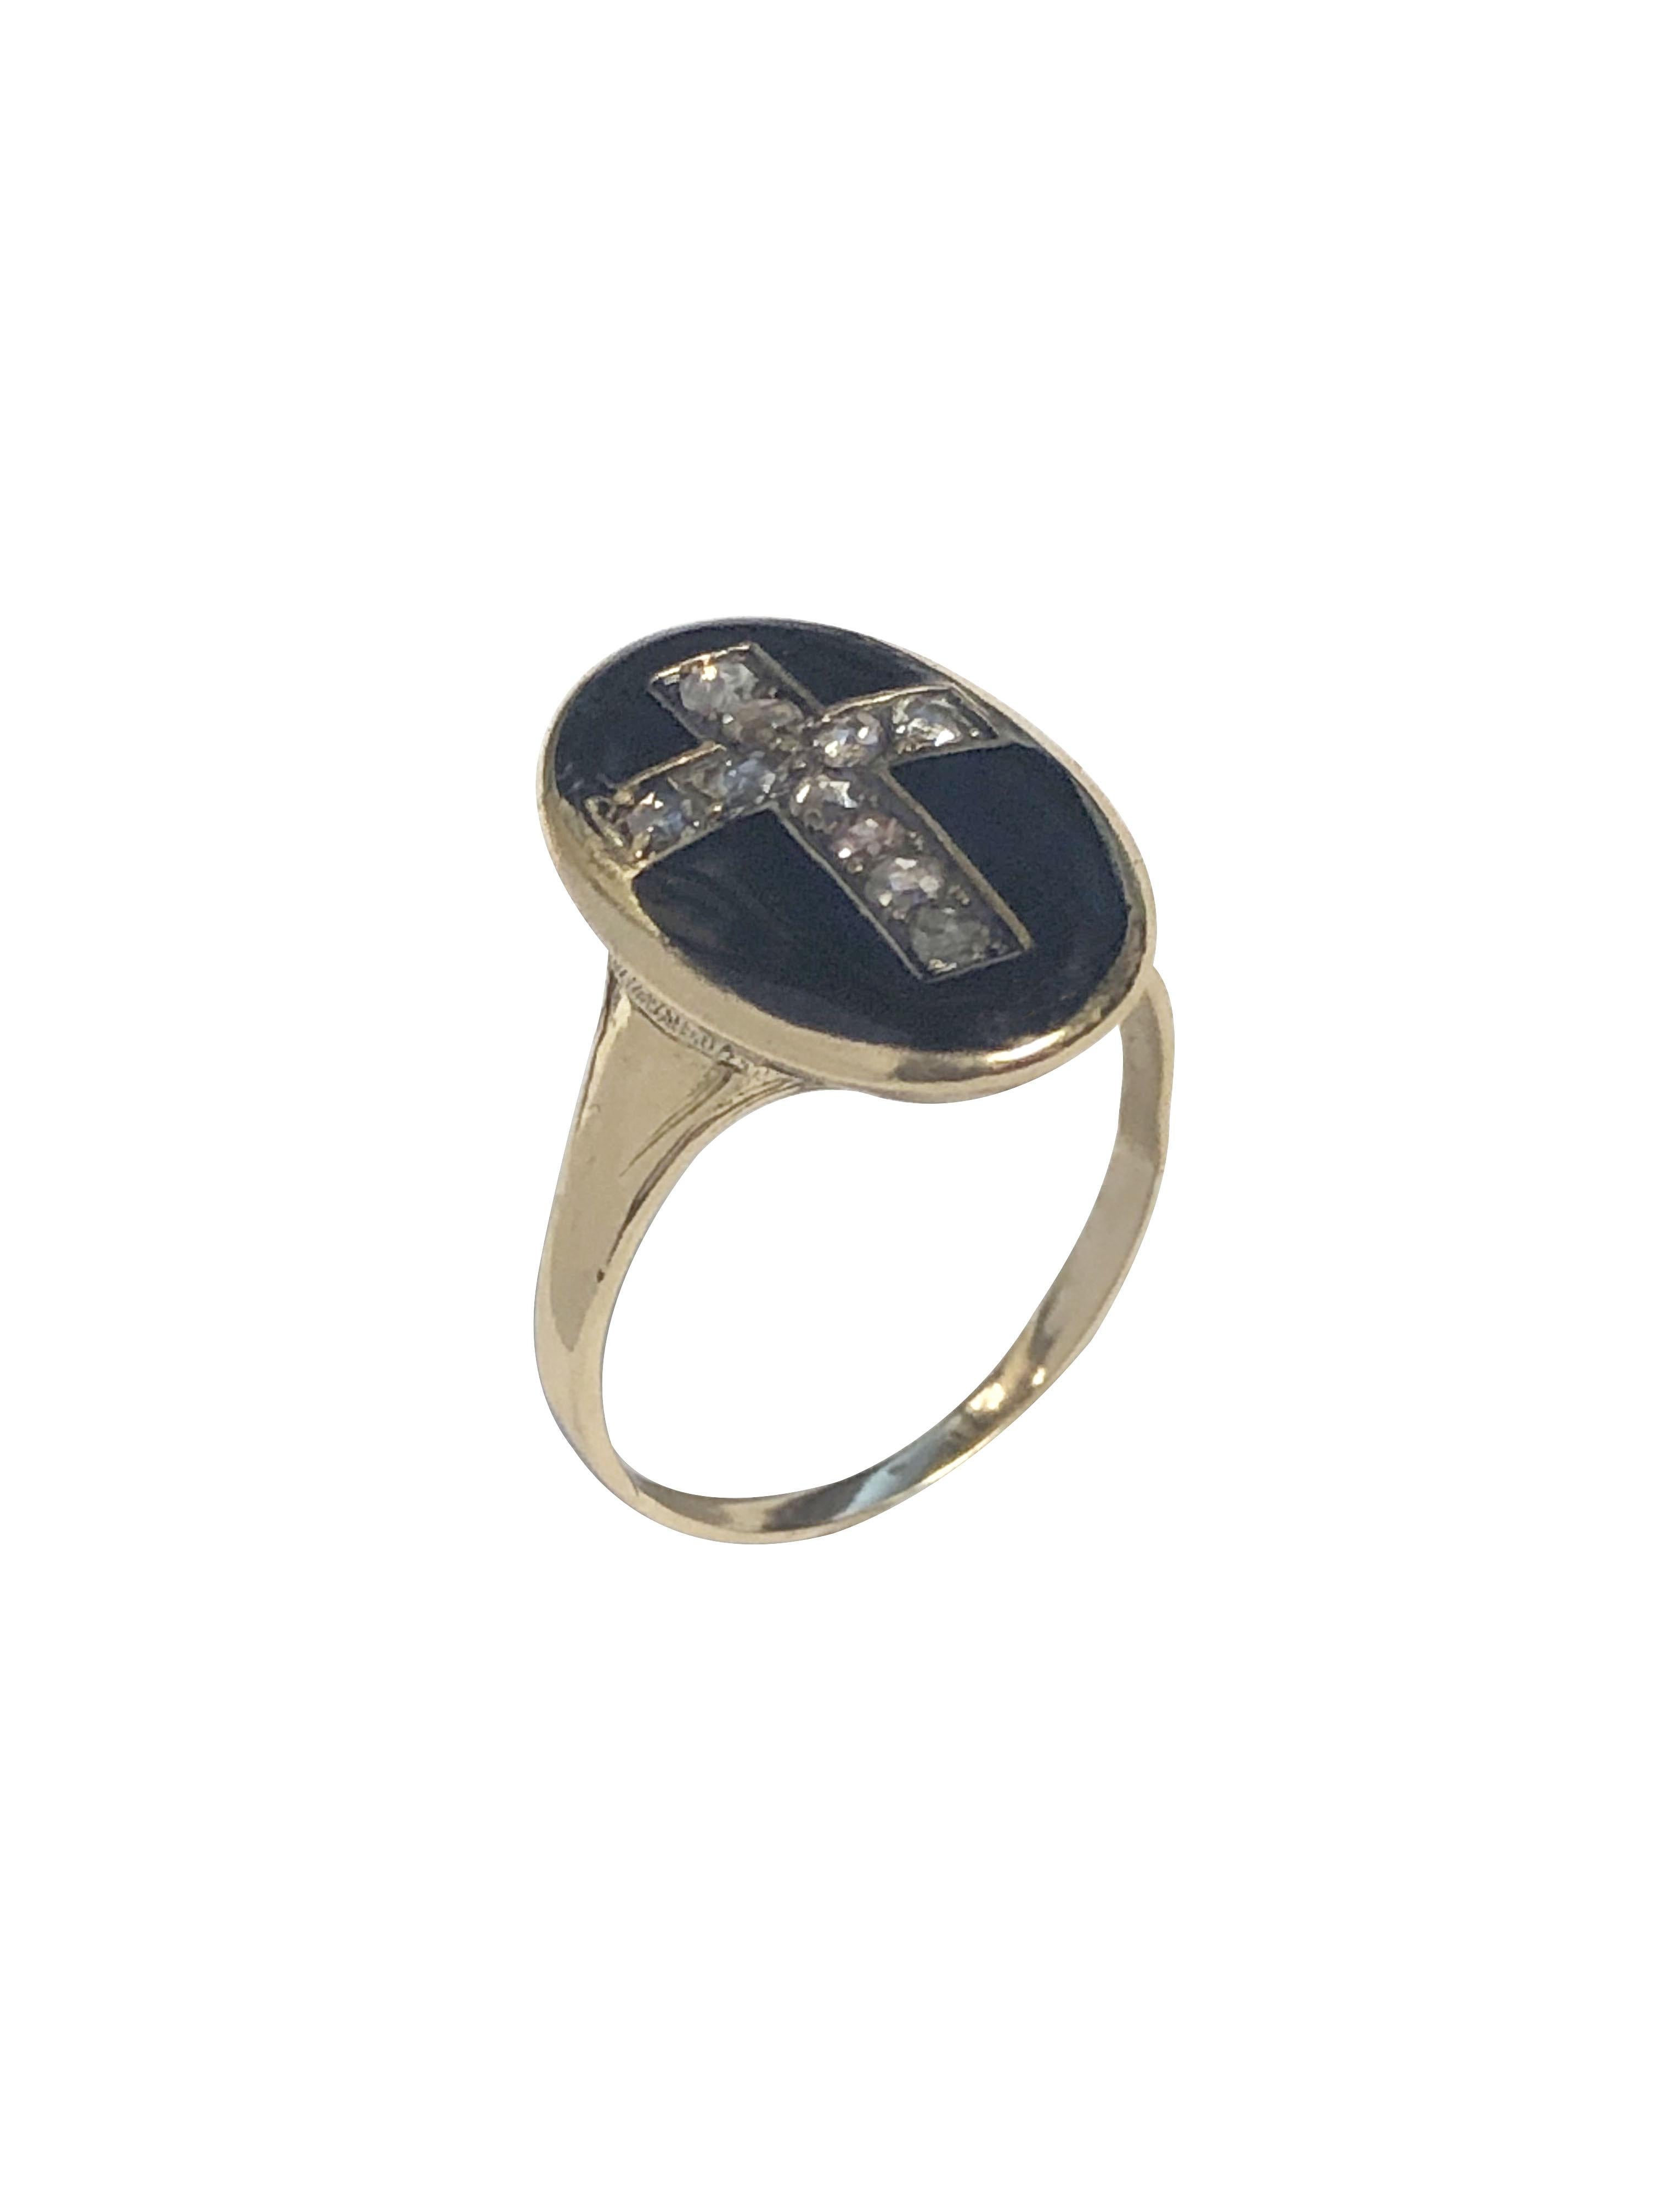 Rose Cut Early Victorian Gold Diamond and Enamel Mourning Memorial Ring